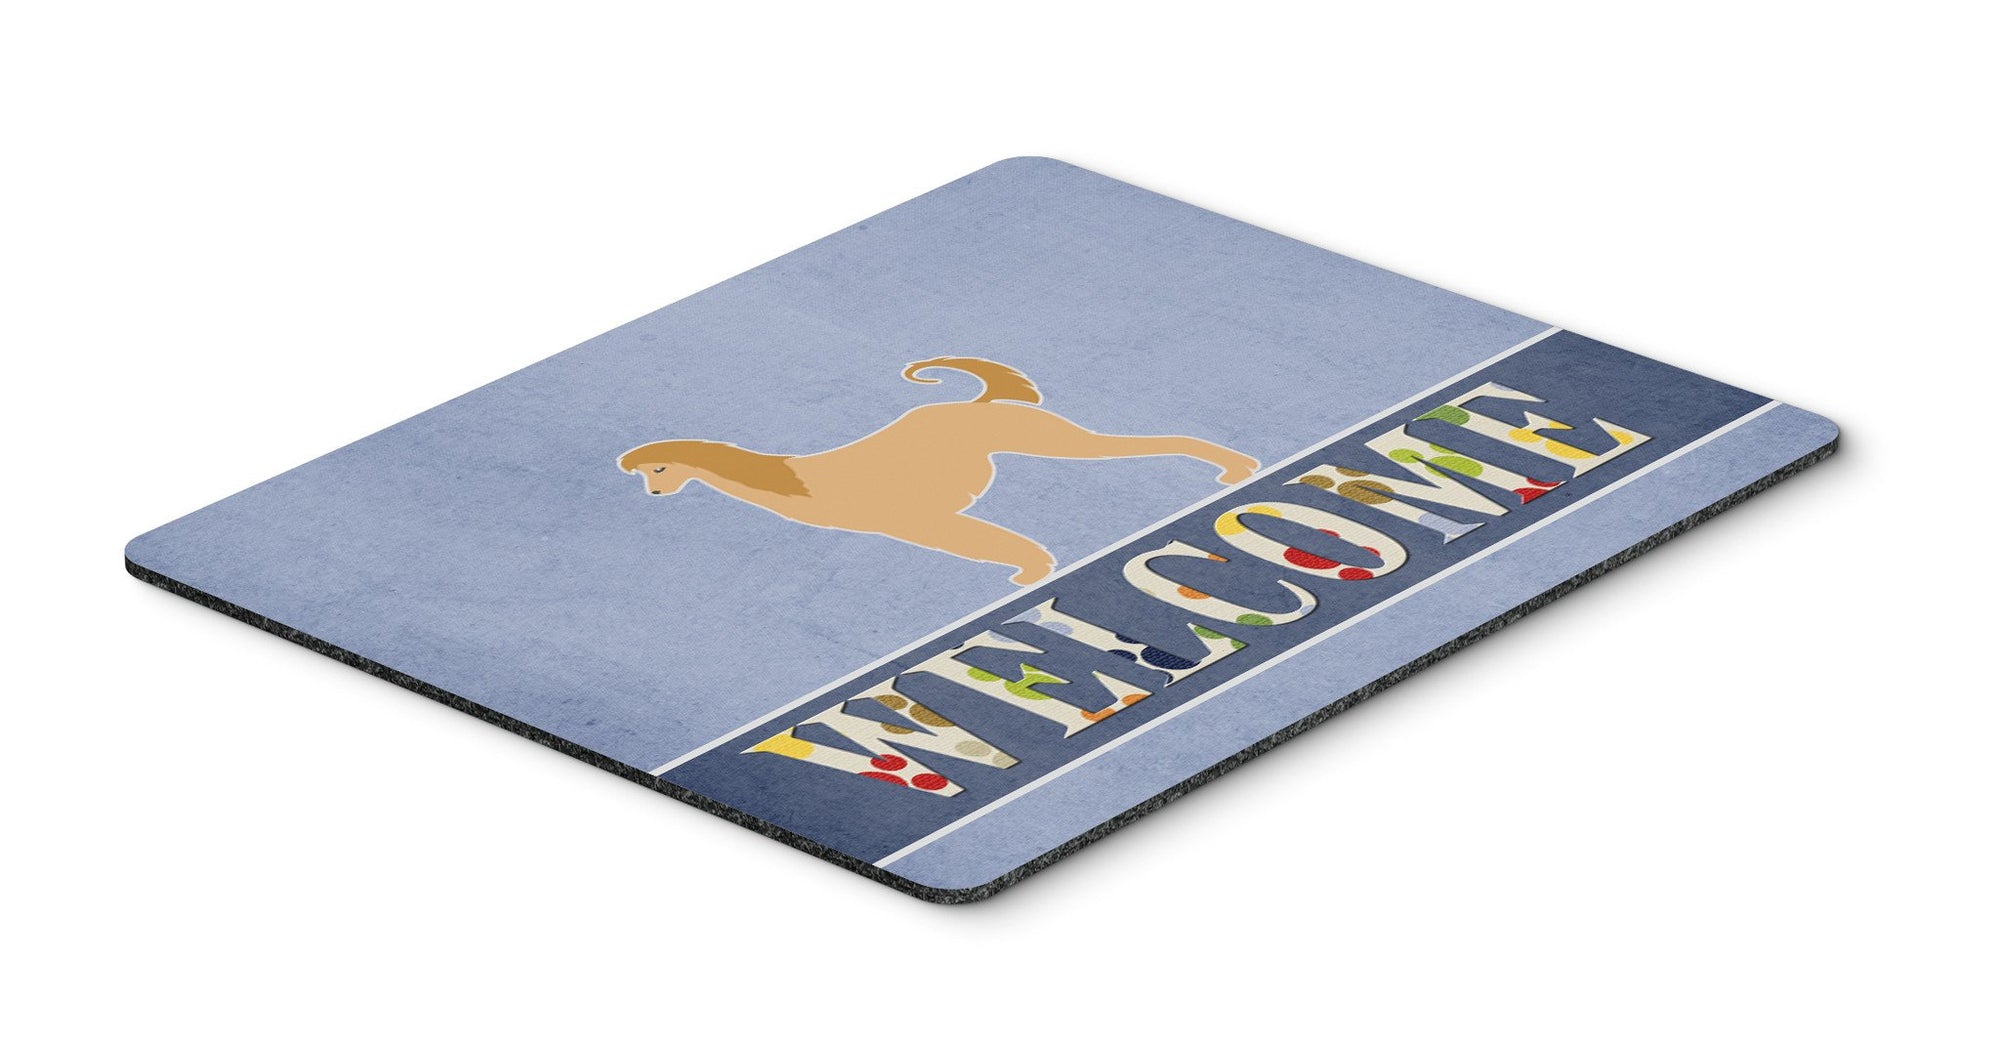 Afghan Hound Welcome Mouse Pad, Hot Pad or Trivet BB5510MP by Caroline's Treasures